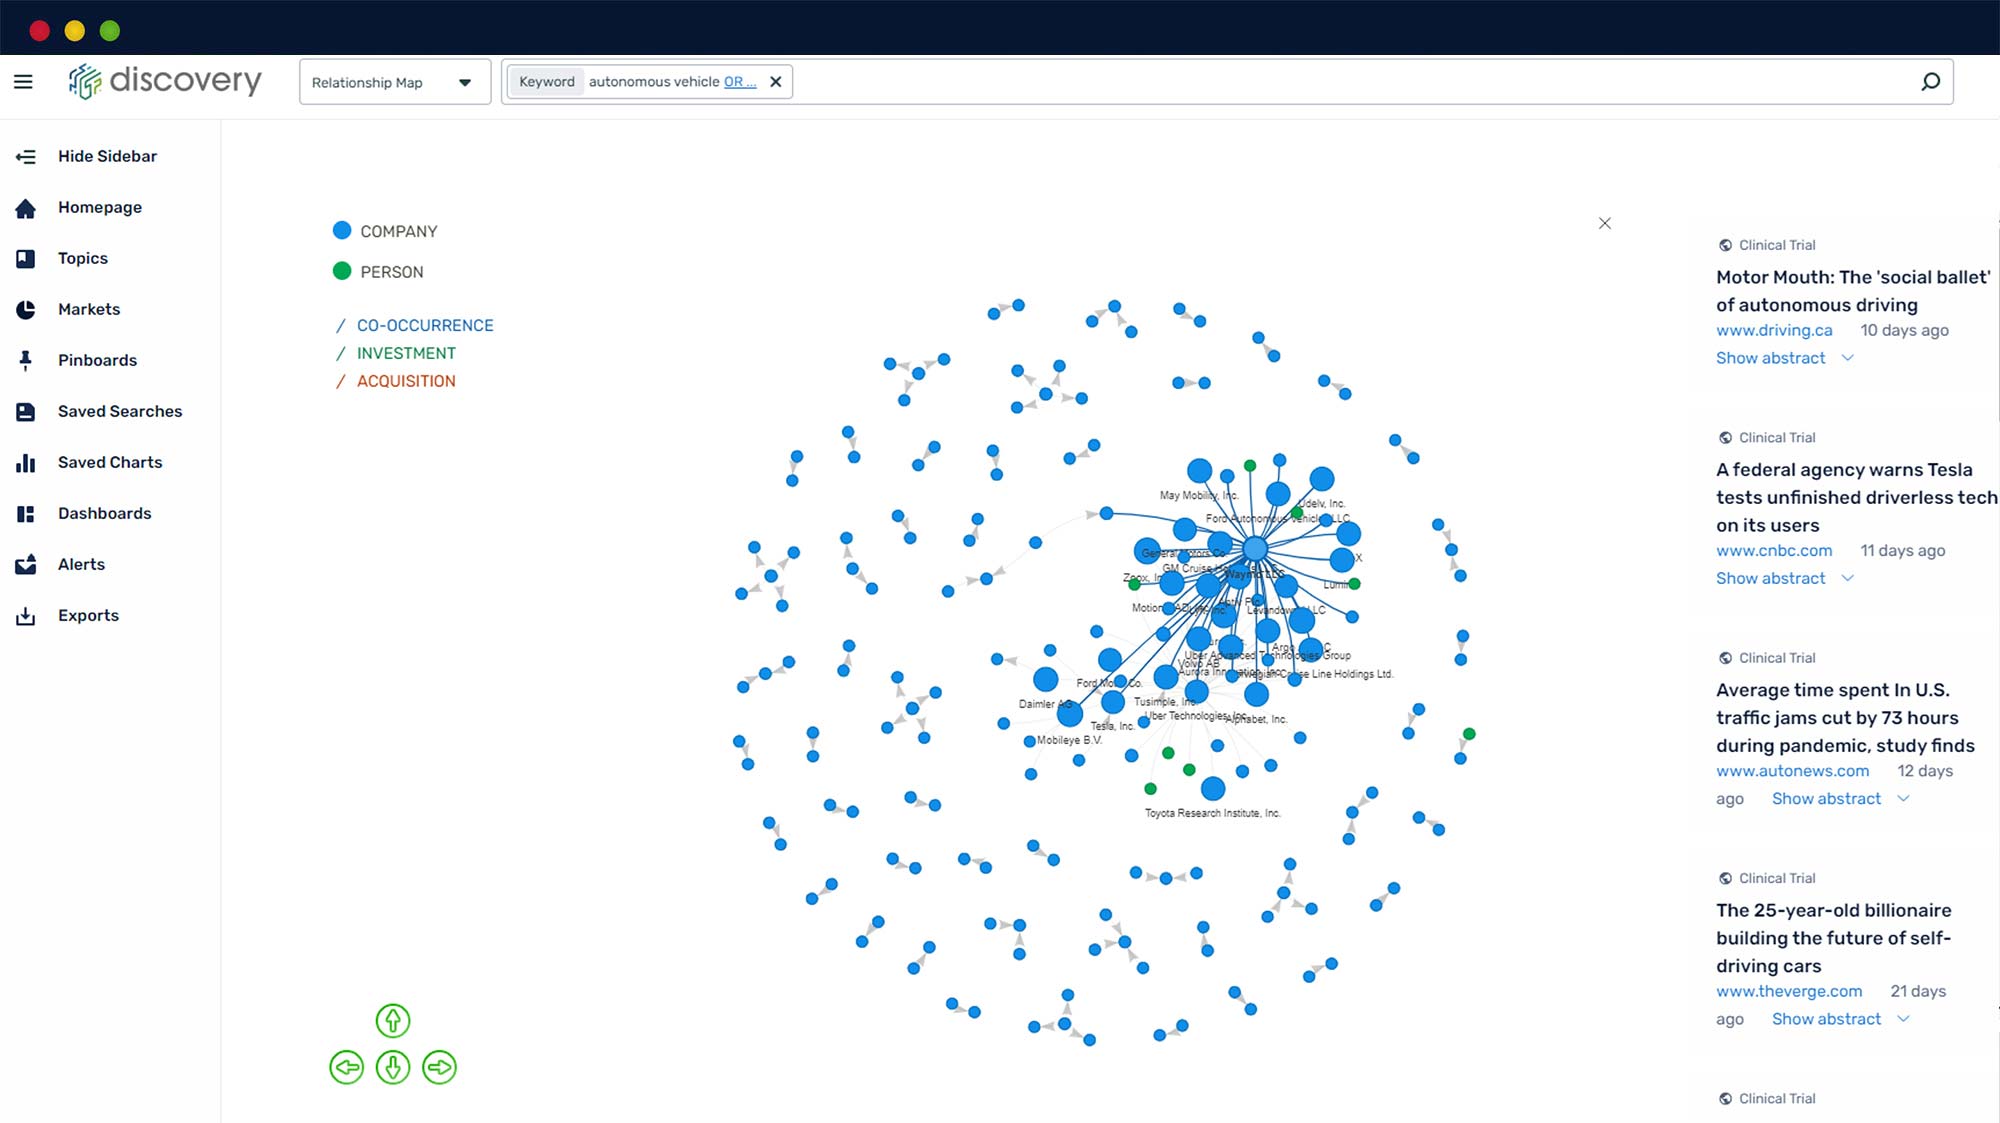 Discovery platform screen grab of relationship map